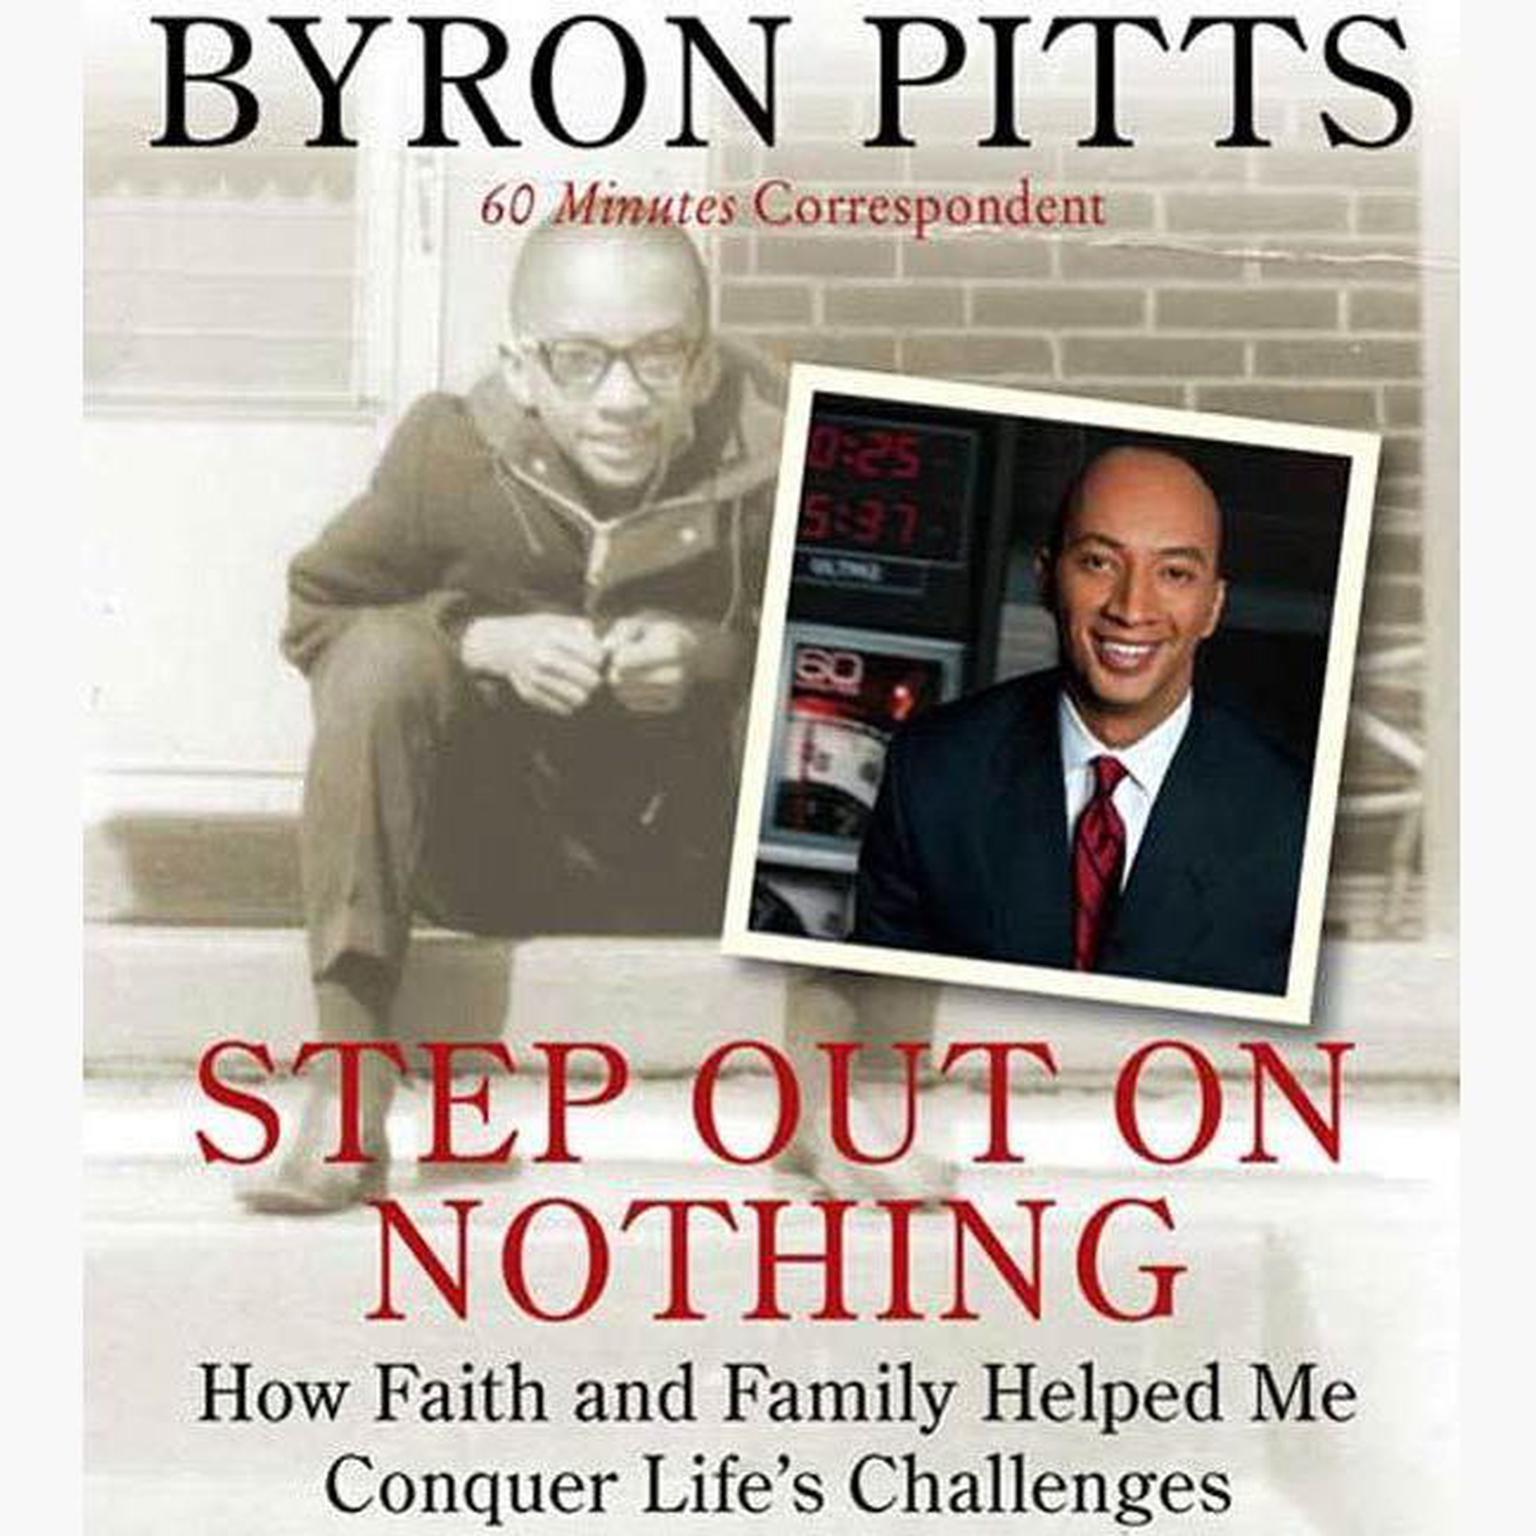 Step Out on Nothing (Abridged): How Faith and Family Helped Me Conquer Lifes Challenges Audiobook, by Byron Pitts